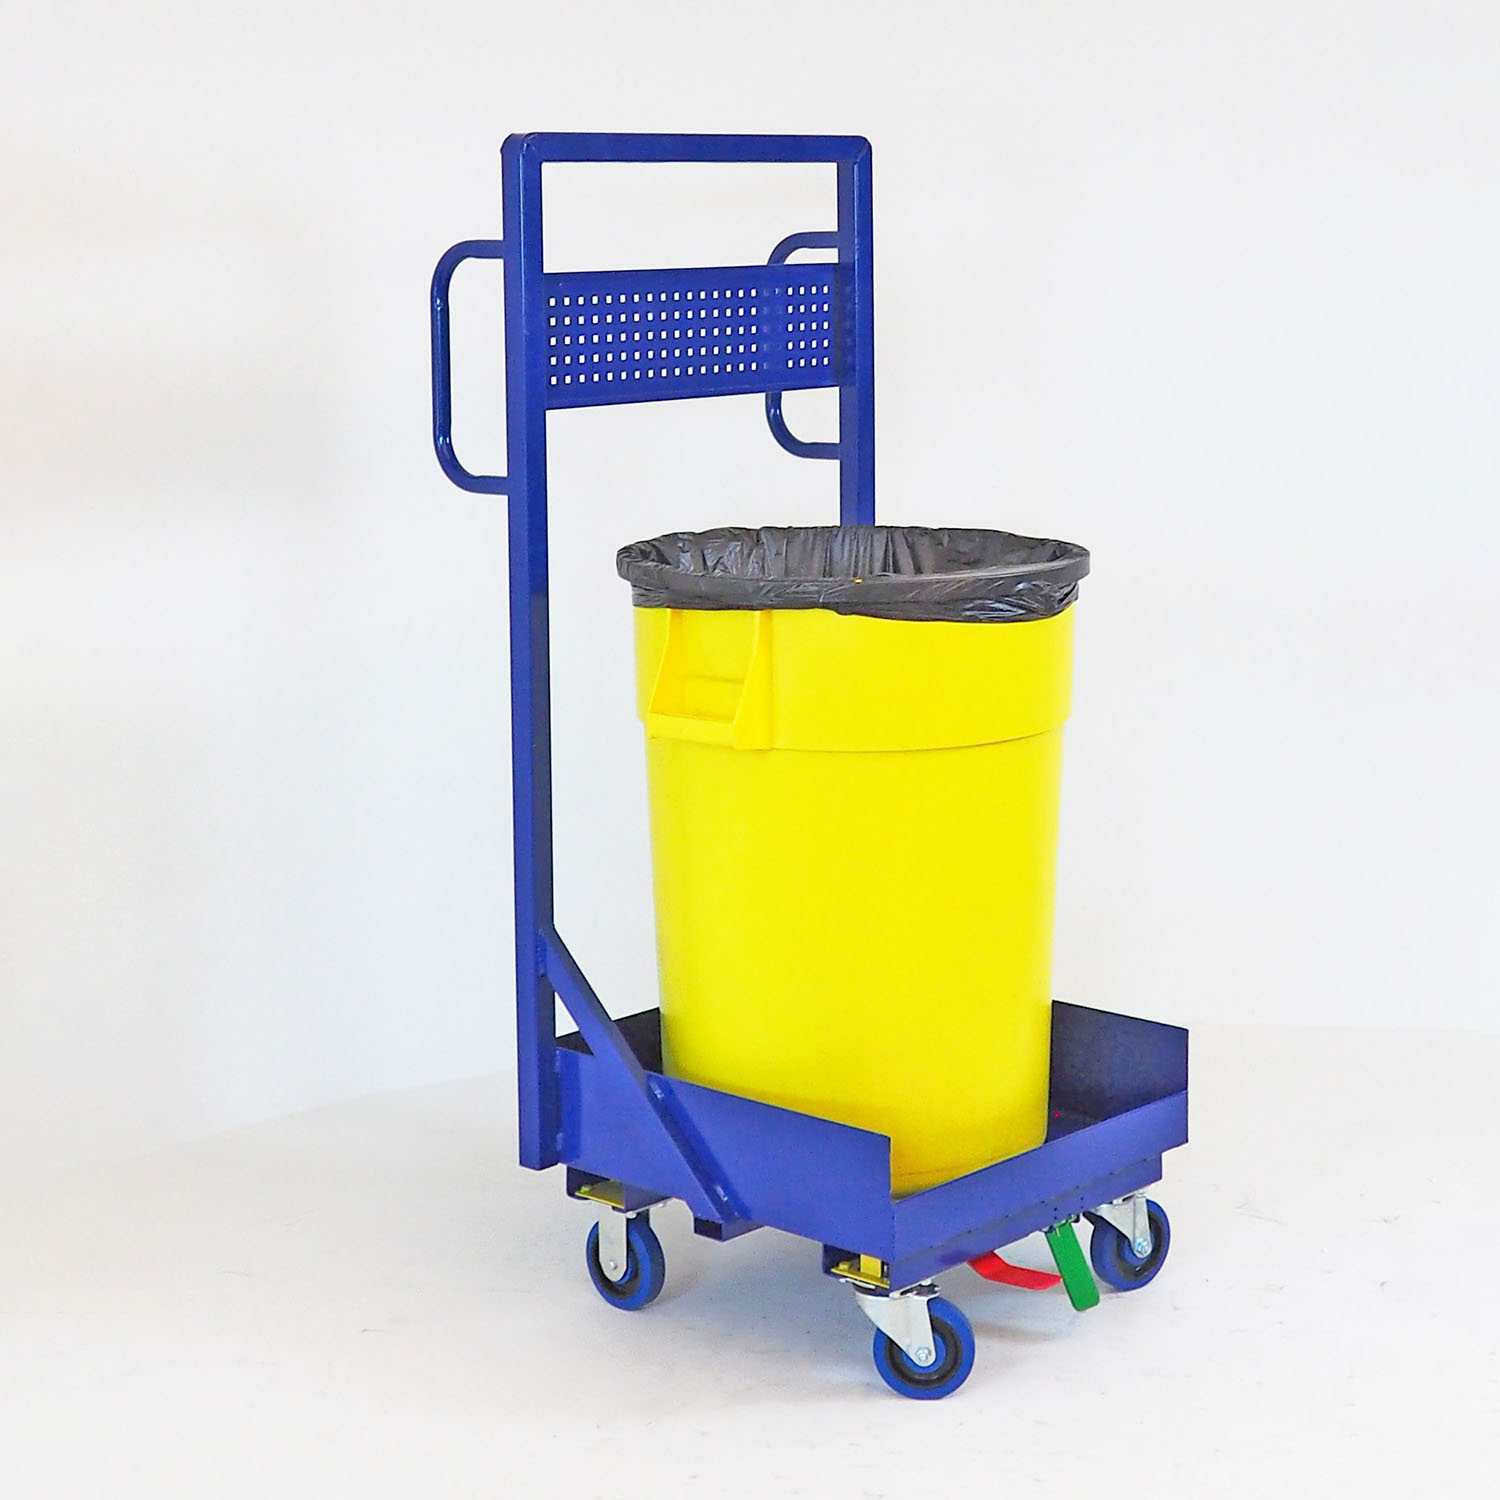 Securely store your cleaning tools with our Trash Carts for quick access. Make cleaning up a breeze with our customizable Trash Carts for increased efficiency. Increase productivity and lower costs with our efficient Trash Cart solutions.